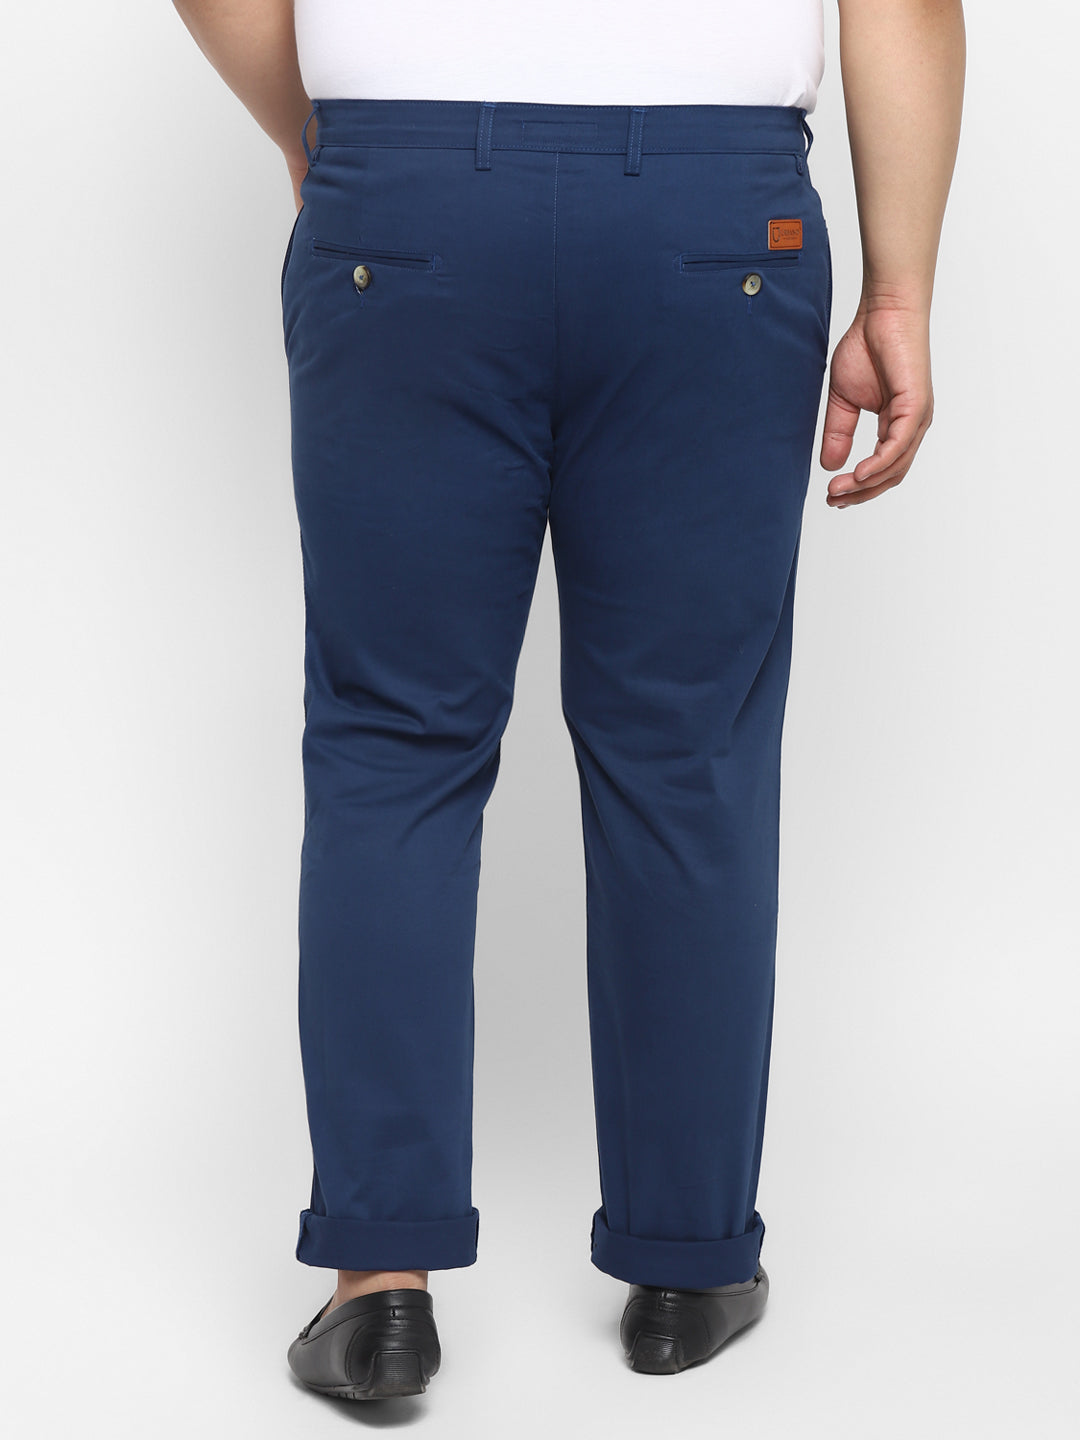 Plus Men's Royal Blue Cotton Regular Fit Casual Chinos Trousers Stretch